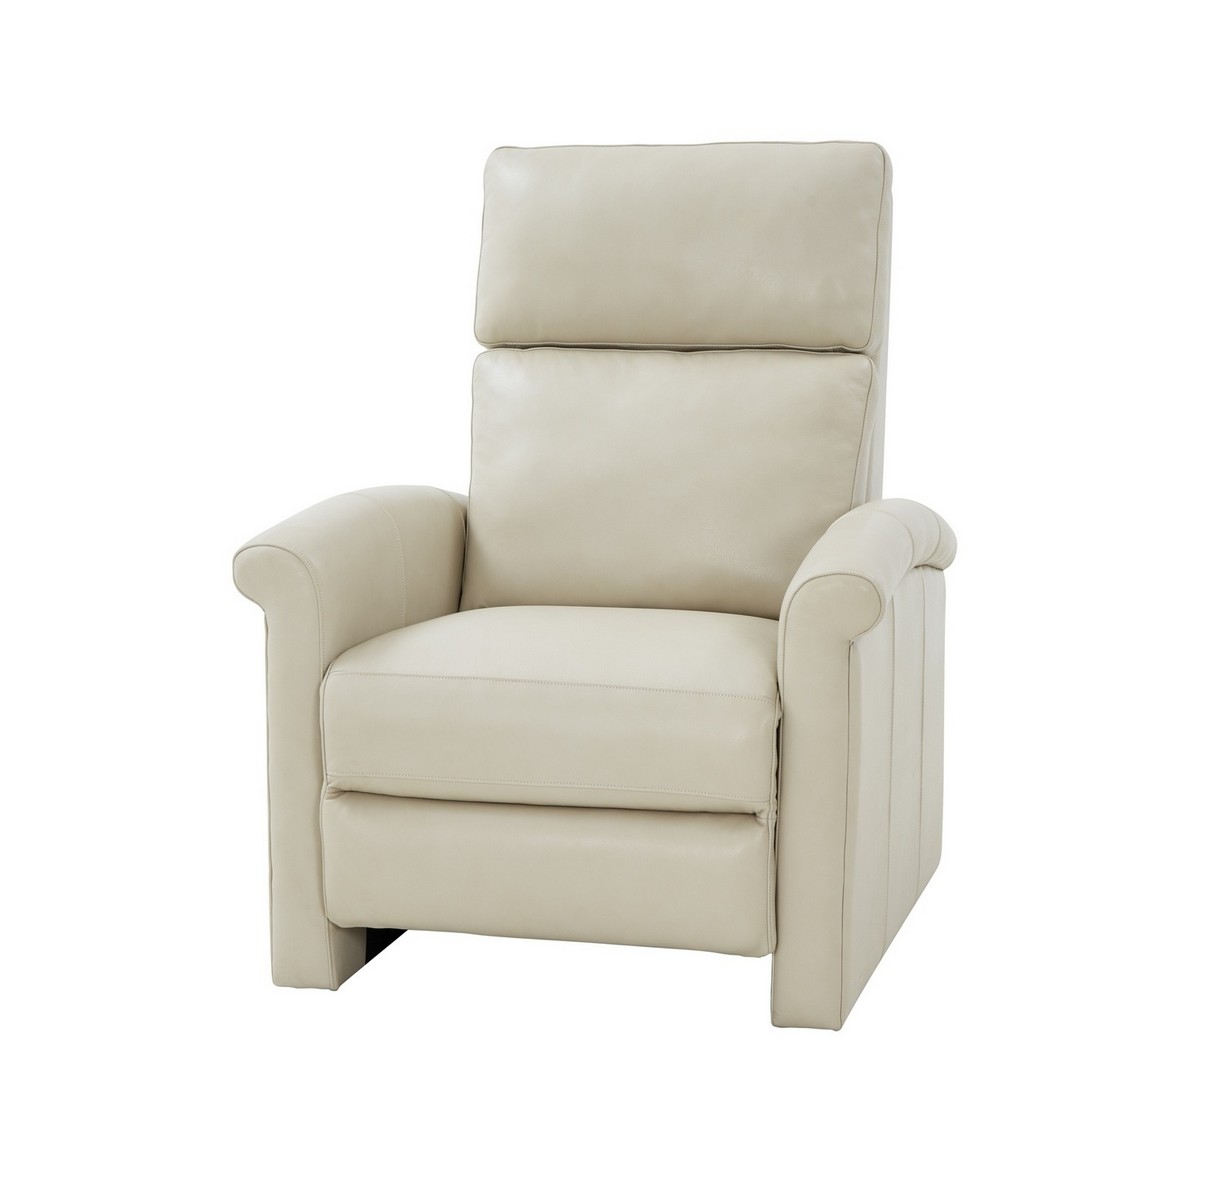 Barcalounger Jaxon Zero Gravity Power Recliner Chair with Power Head Rest and Lumbar - Barone Parchment/All Leather